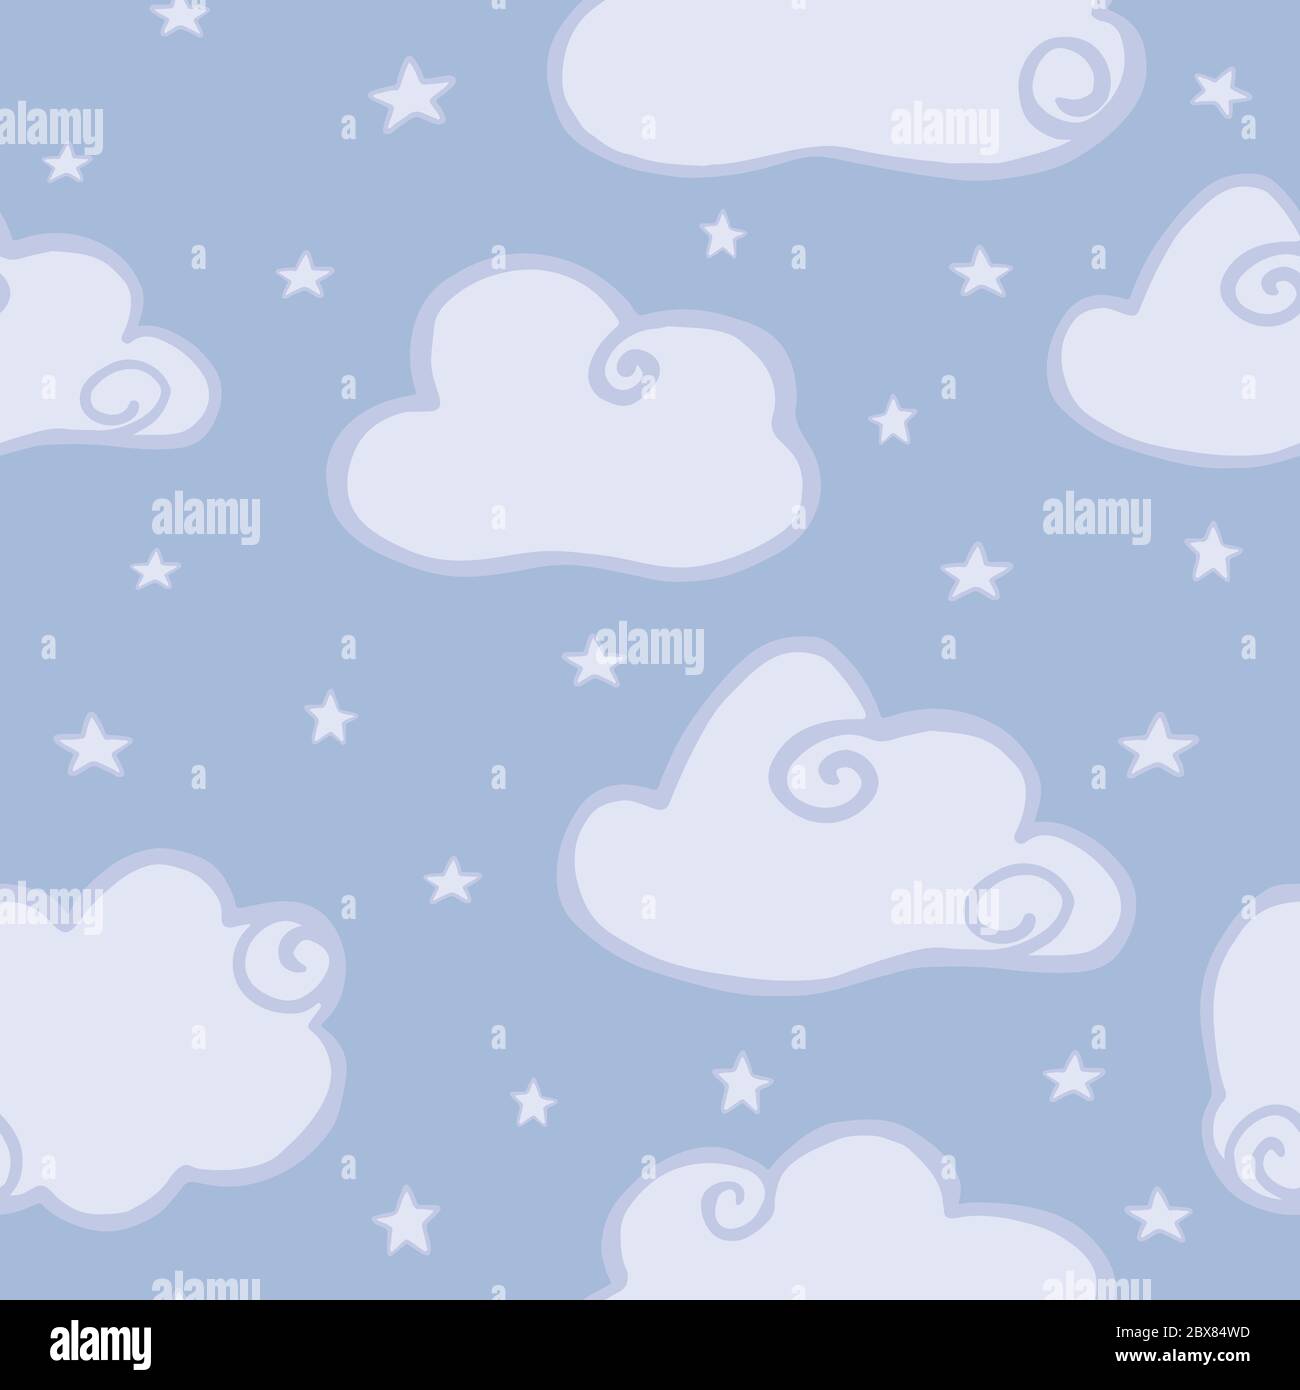 Cute Cloud Sky Seamless Pattern On Blue Background Hand Drawn Night Cloud Sky Wallpaper Design For Baby Fabric Textile Print Wrapping Paper Cover Stock Vector Image Art Alamy